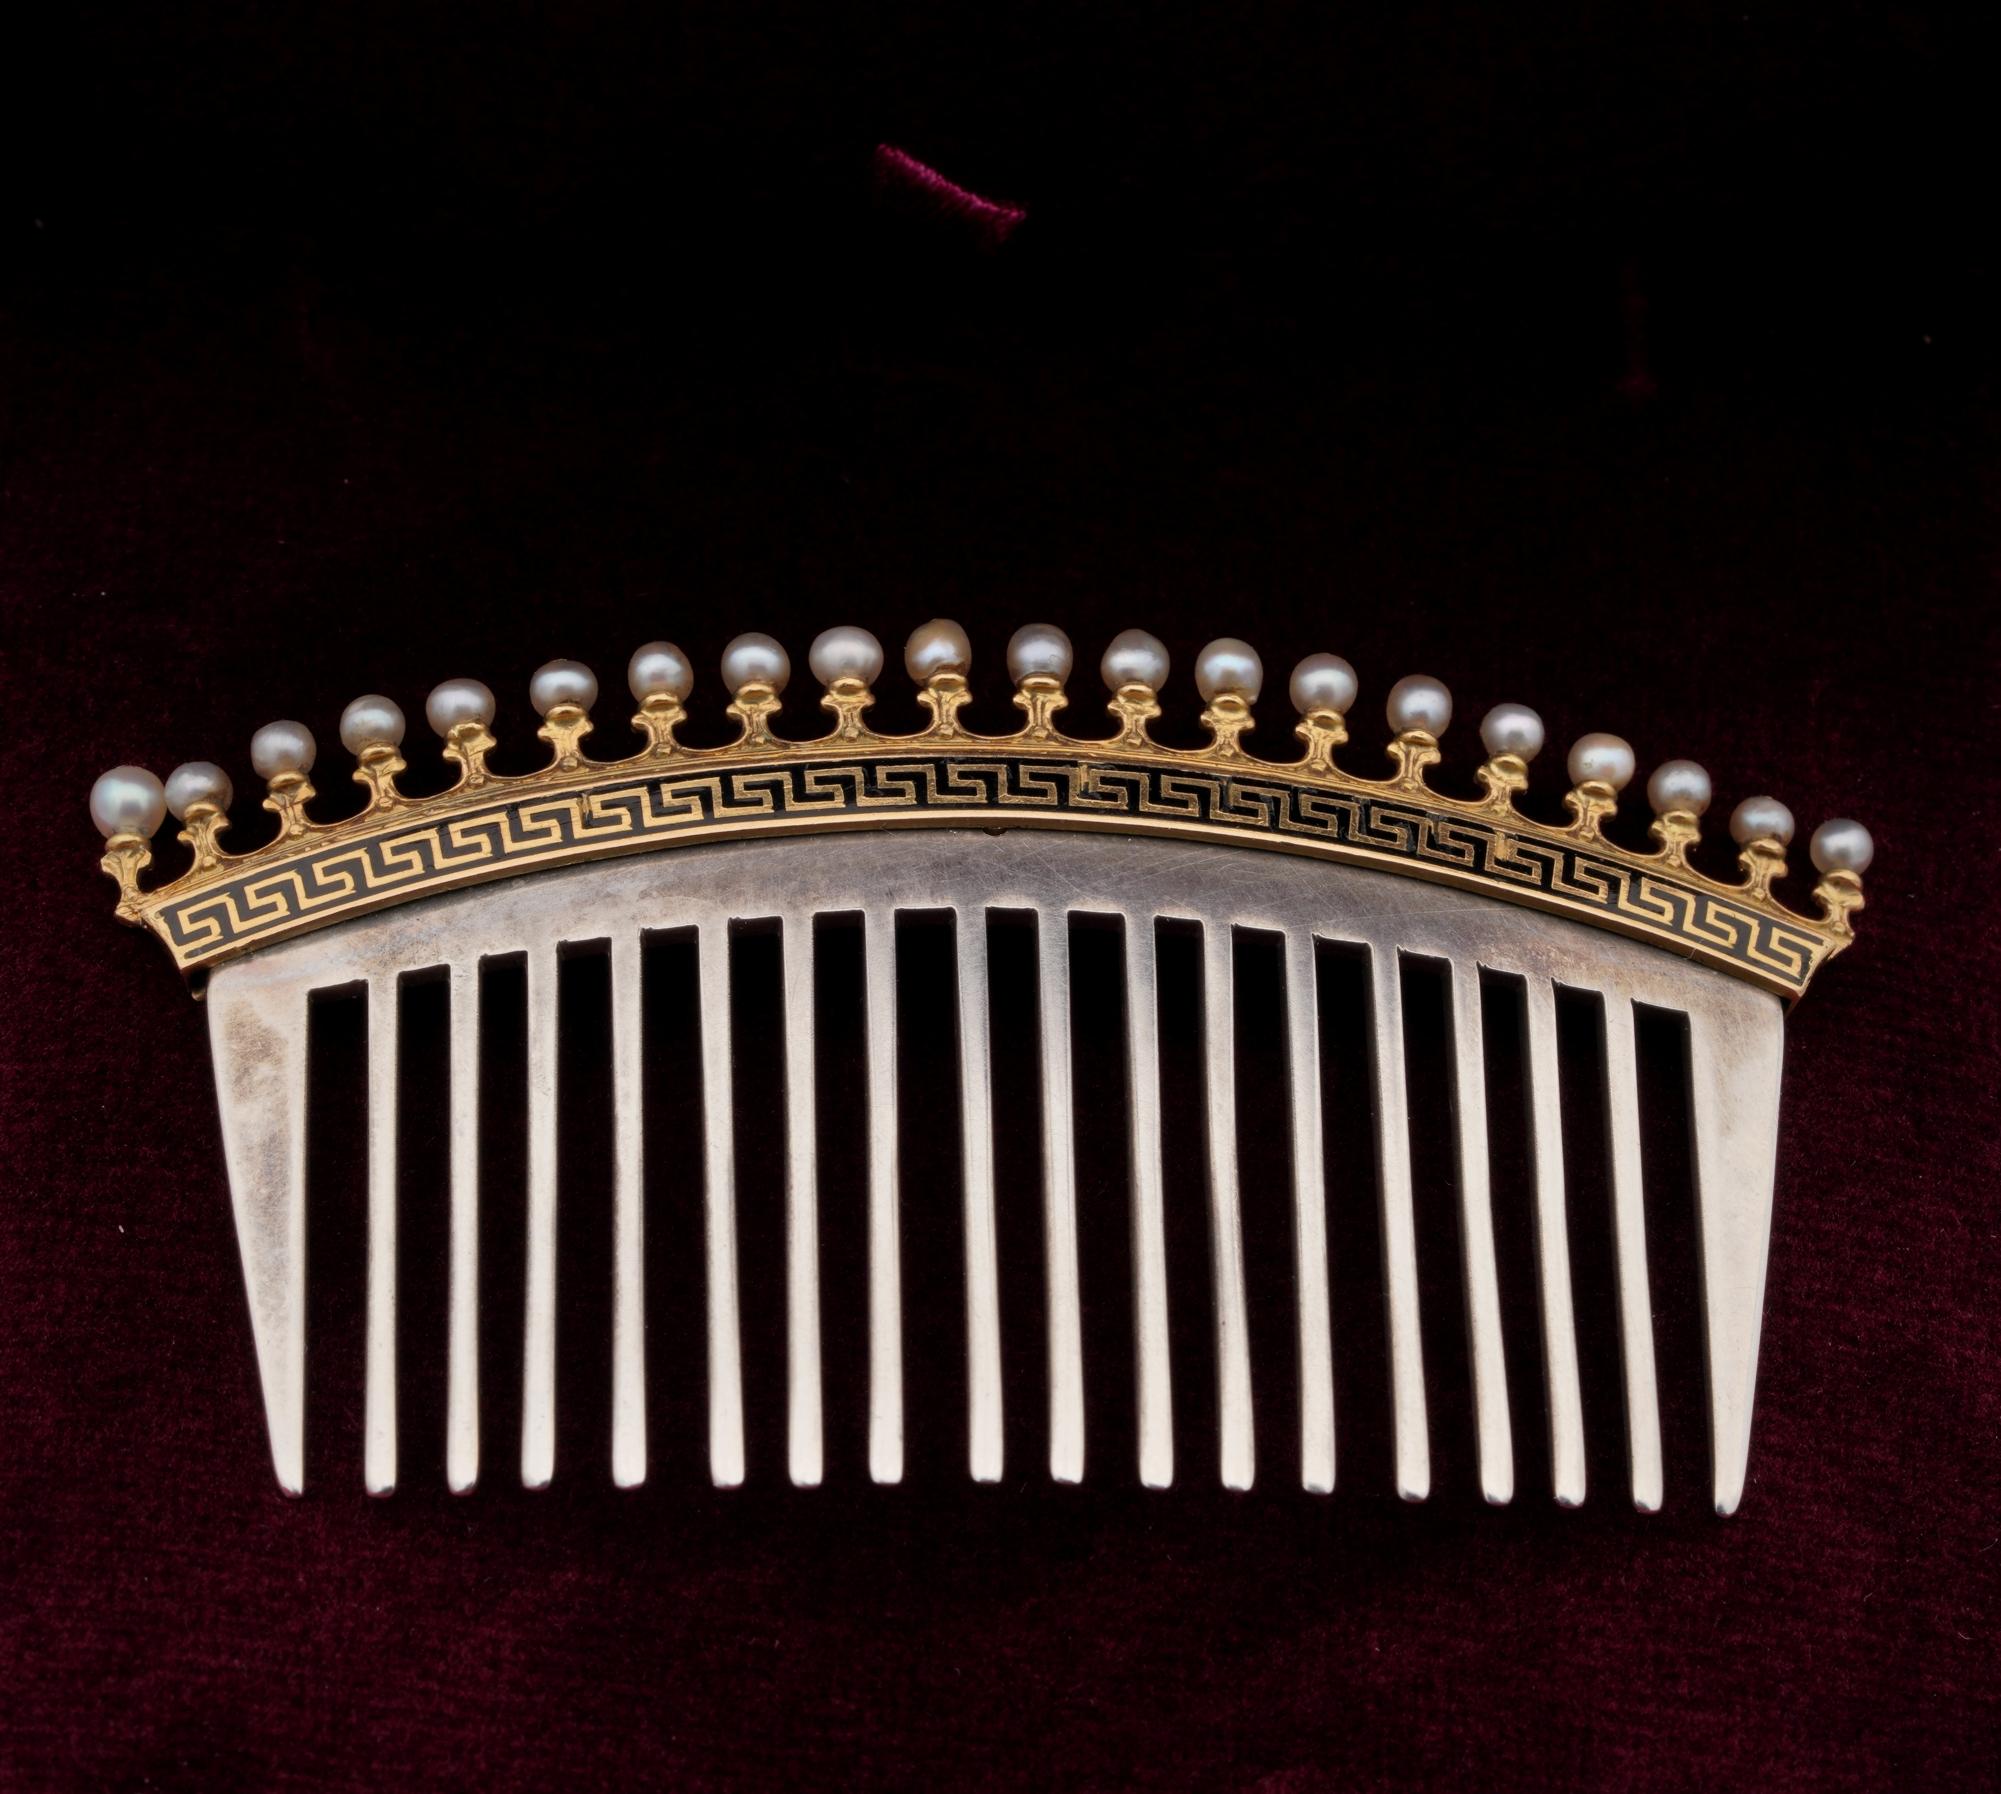 The rarity corner

Magnificent French Empire - Regency period 1800/1820 ca – tiara comb hair ornament
Entirely made of 18 KT gold for the top and solid silver for the comb
Beautifully adorned with Natural Pearls and black Enamelling Greek Key motifs